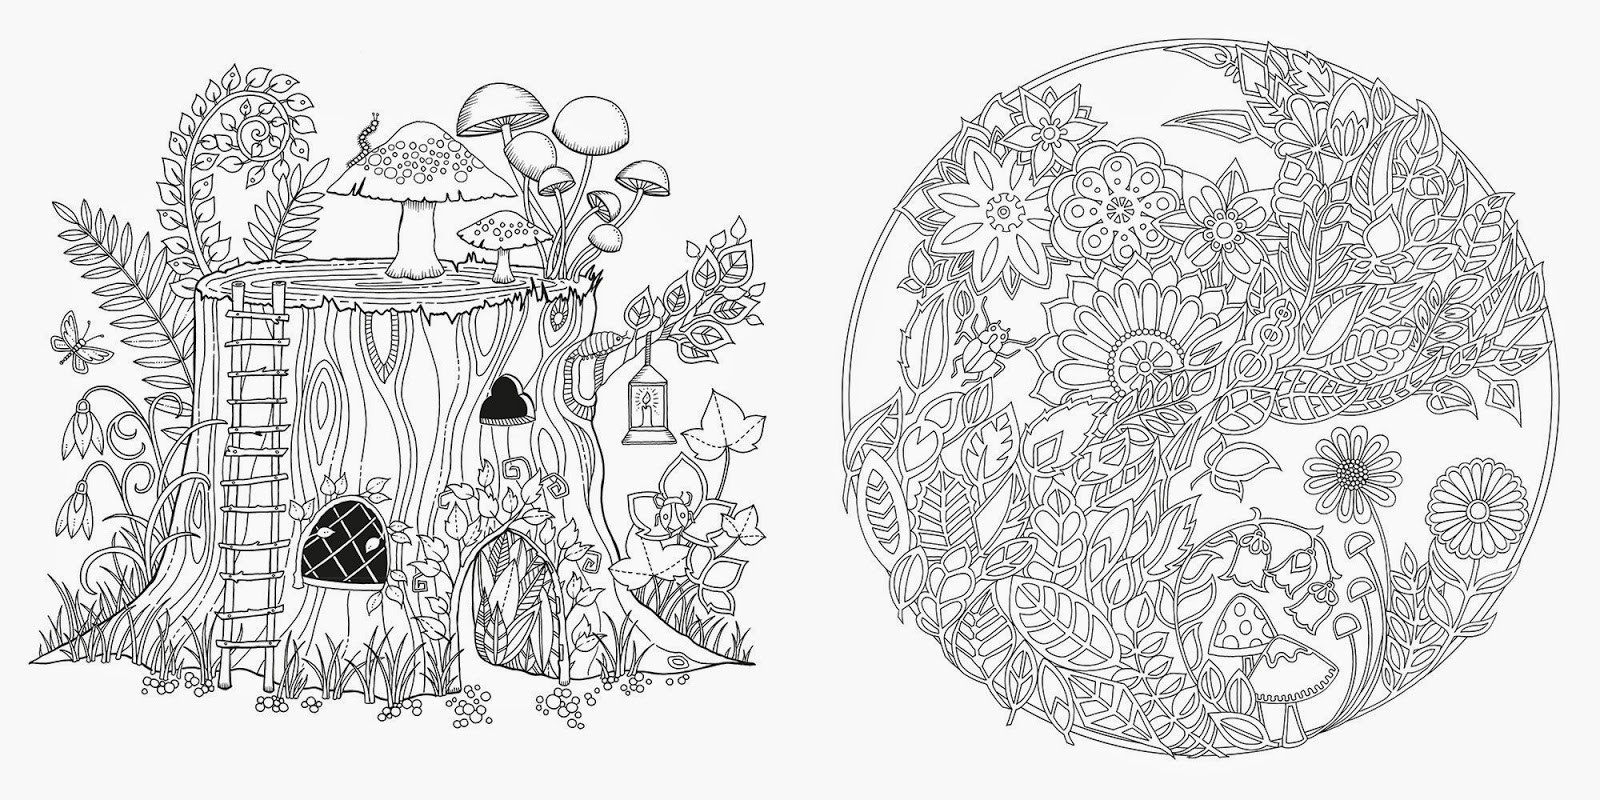 Forest Coloring Pages For Adults
 SurLaLune Fairy Tales Blog Art Thursday Enchanted Forest